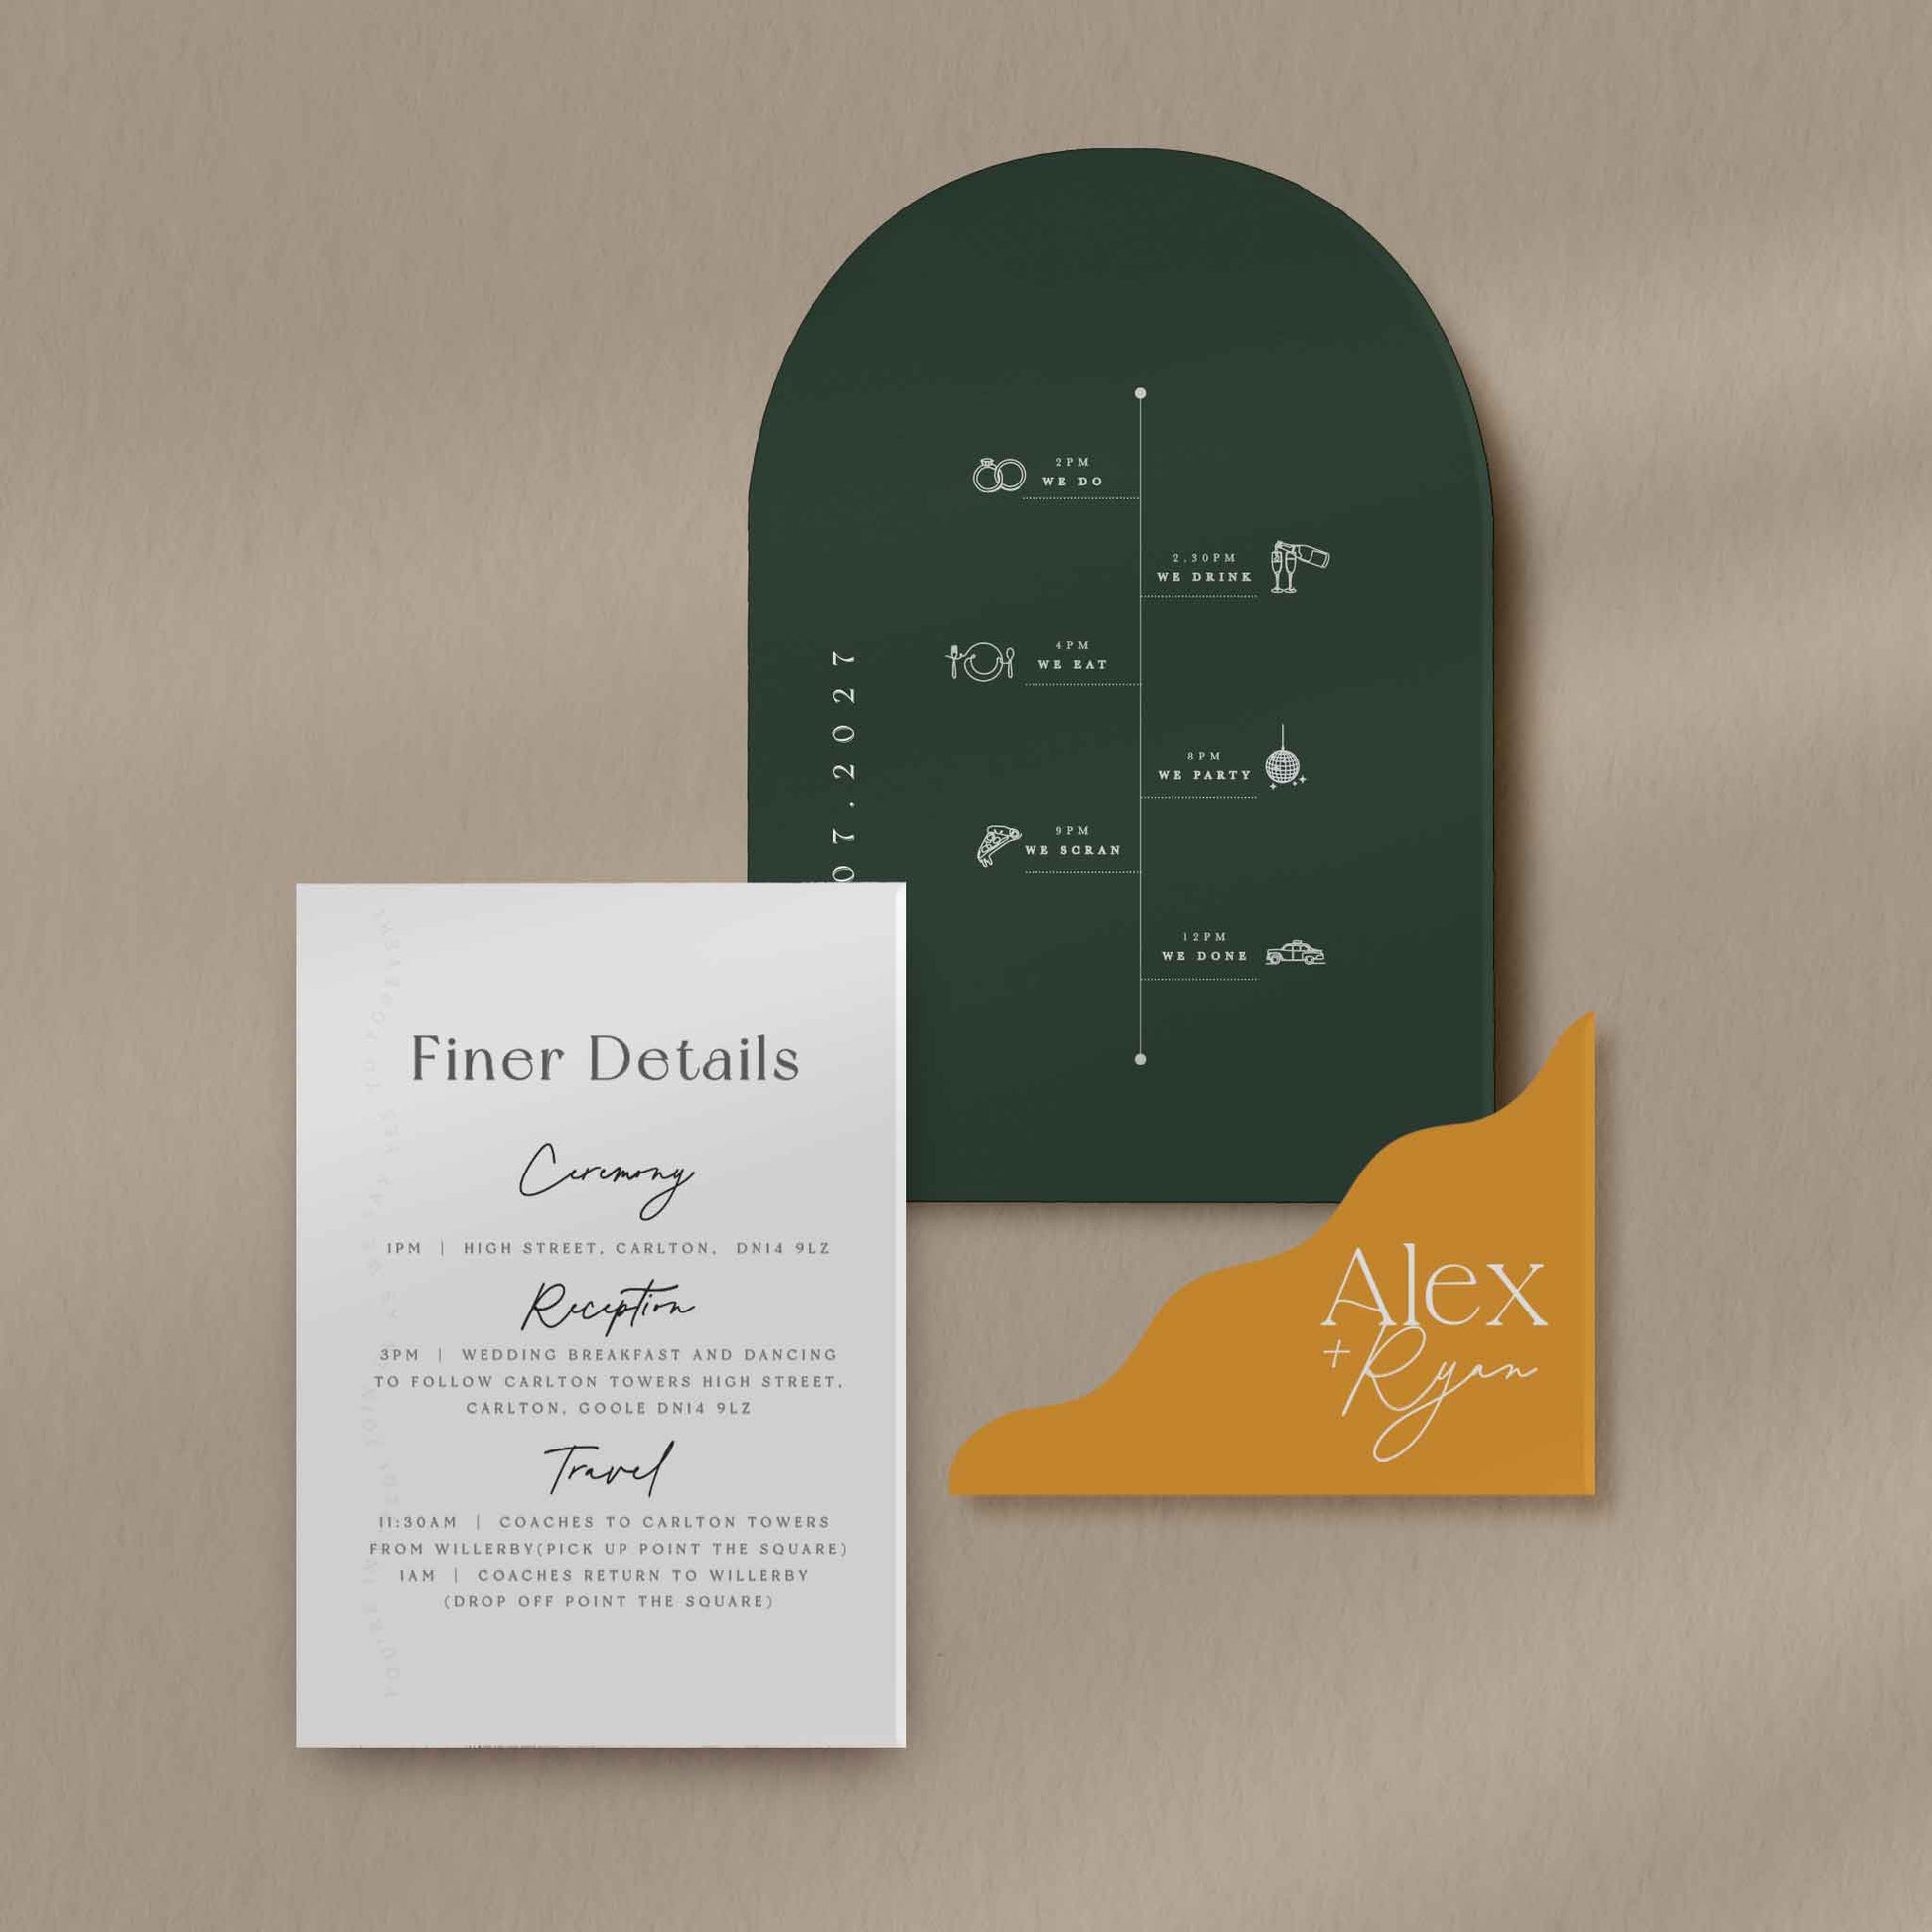 Scallop Envelope Sample  Ivy and Gold Wedding Stationery   